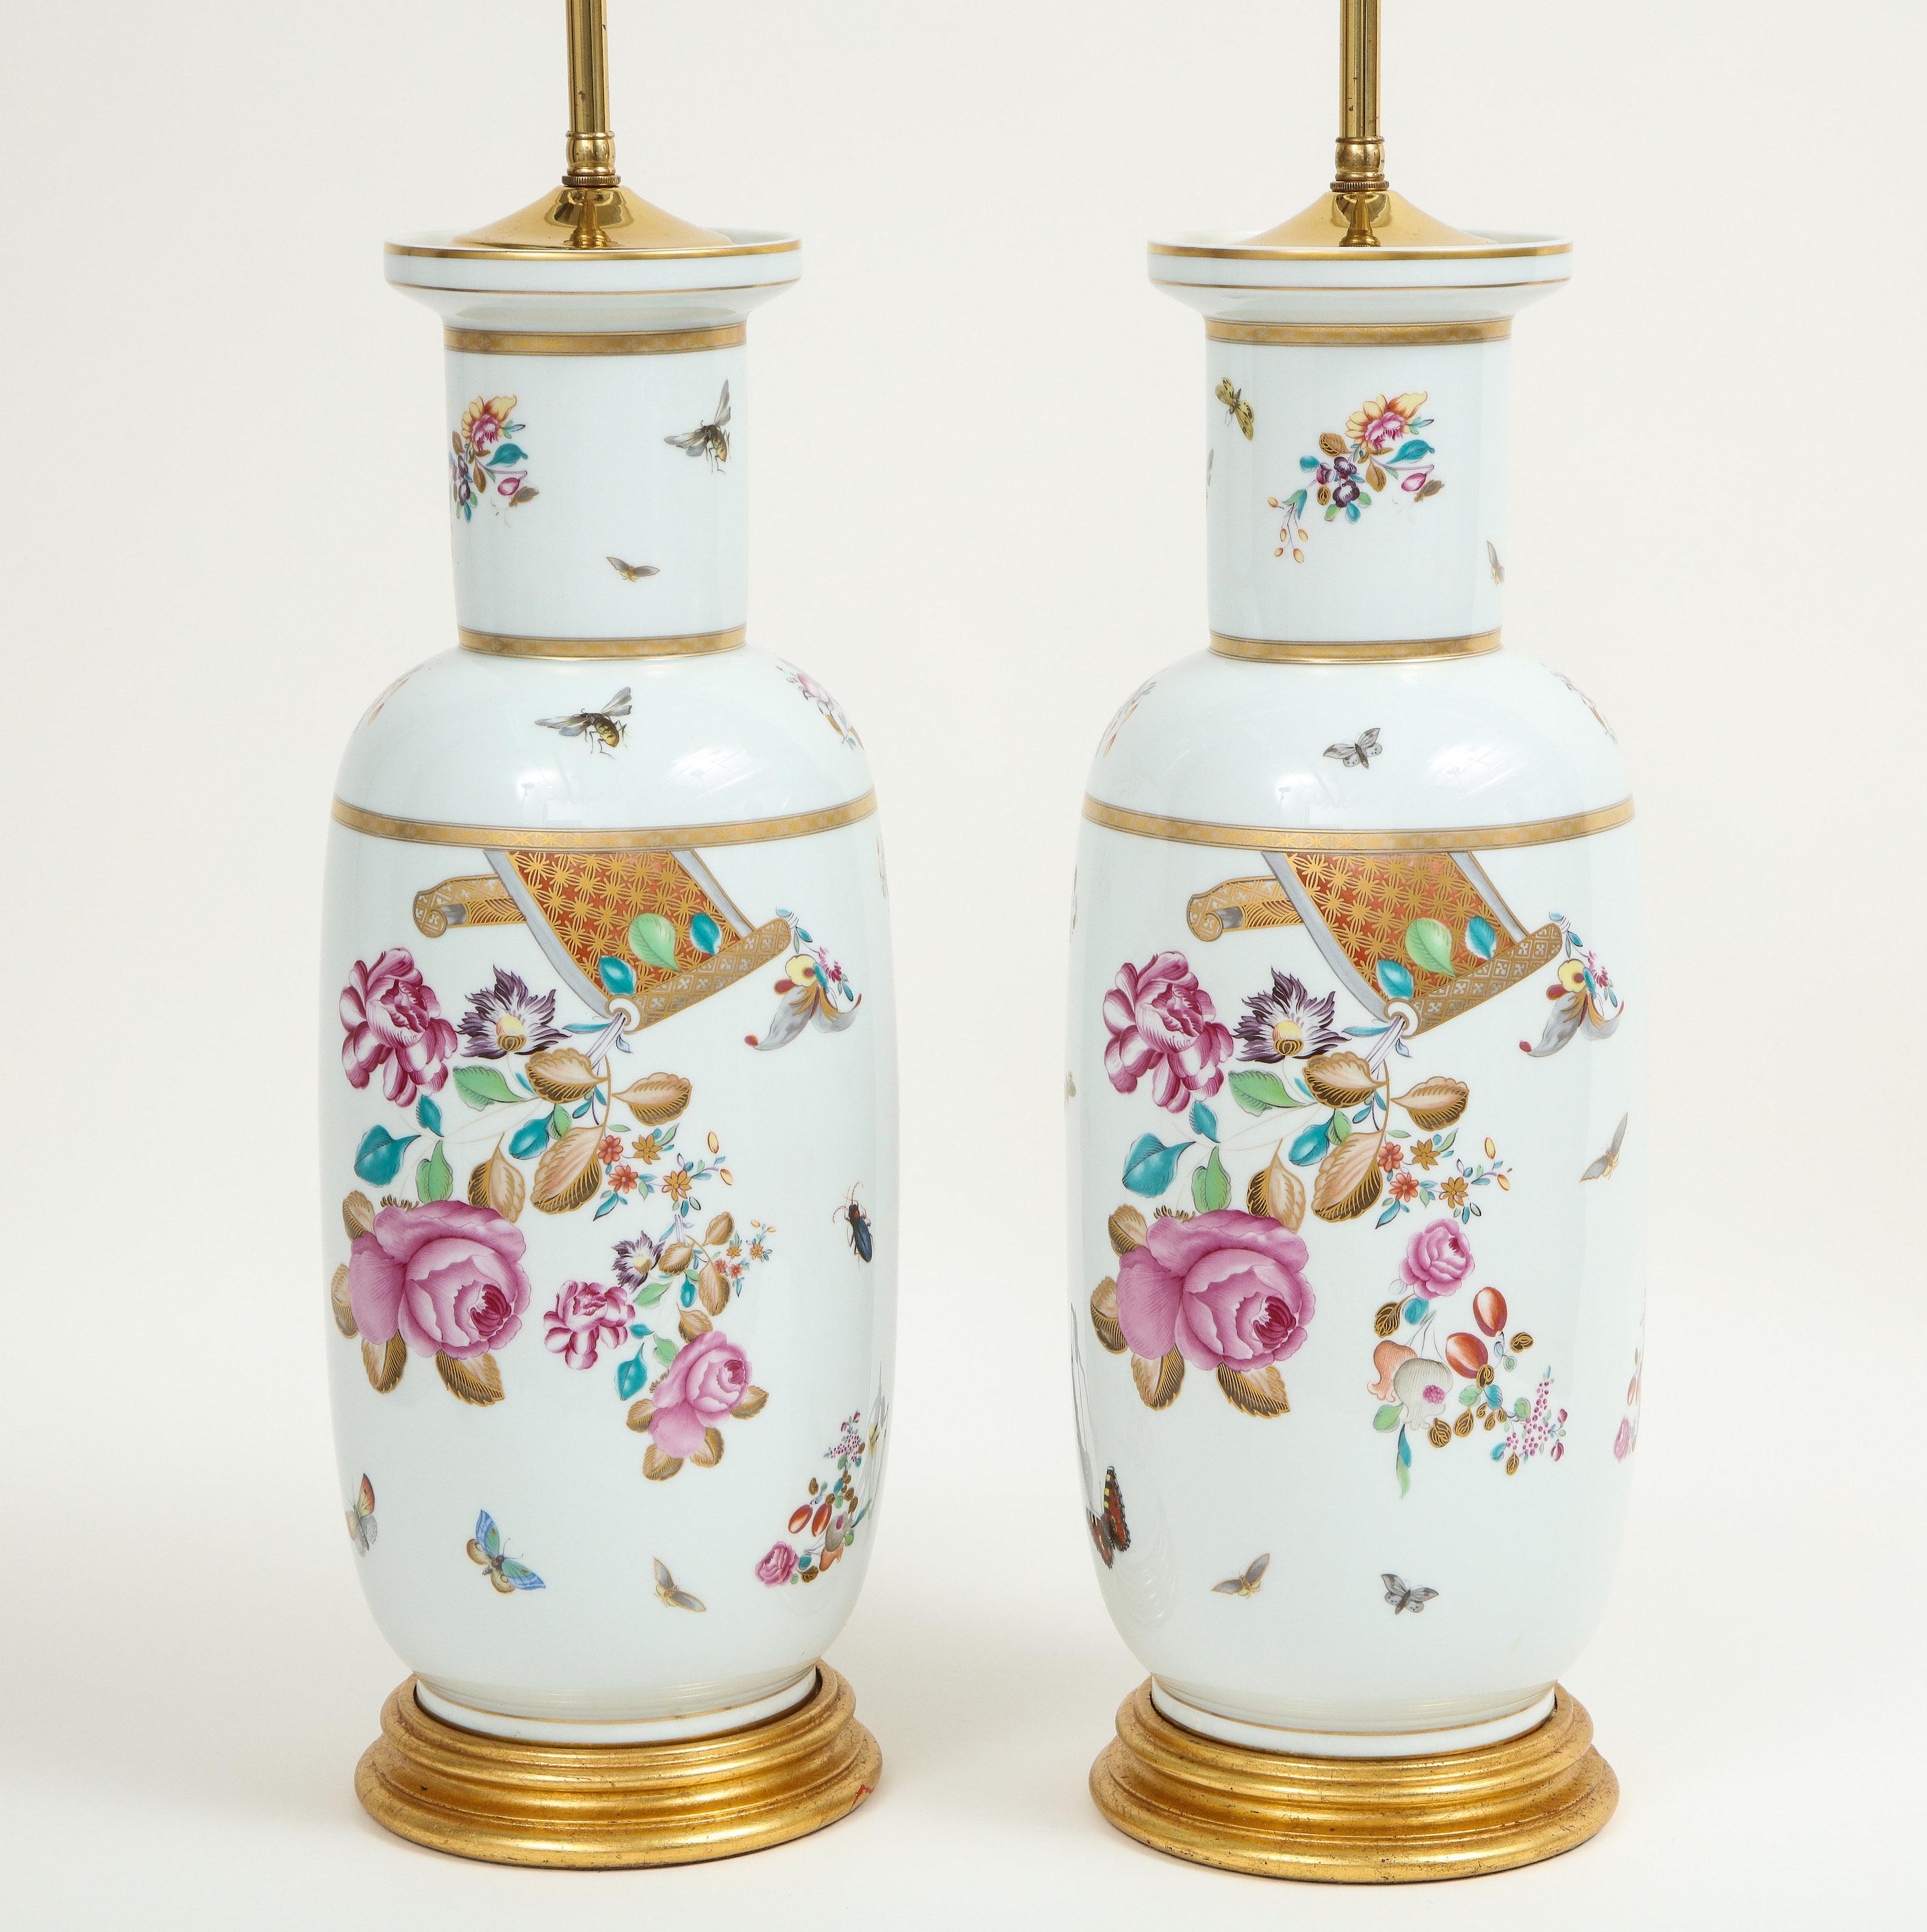 Each decorated in the 18th century spirit with floral blossoms, butterflies and bees, and gilt banding, on a giltwood turned base. Fitted with brass sockets for two bulbs and adjustable rod to change lampshade height. Height to top of vase is 20